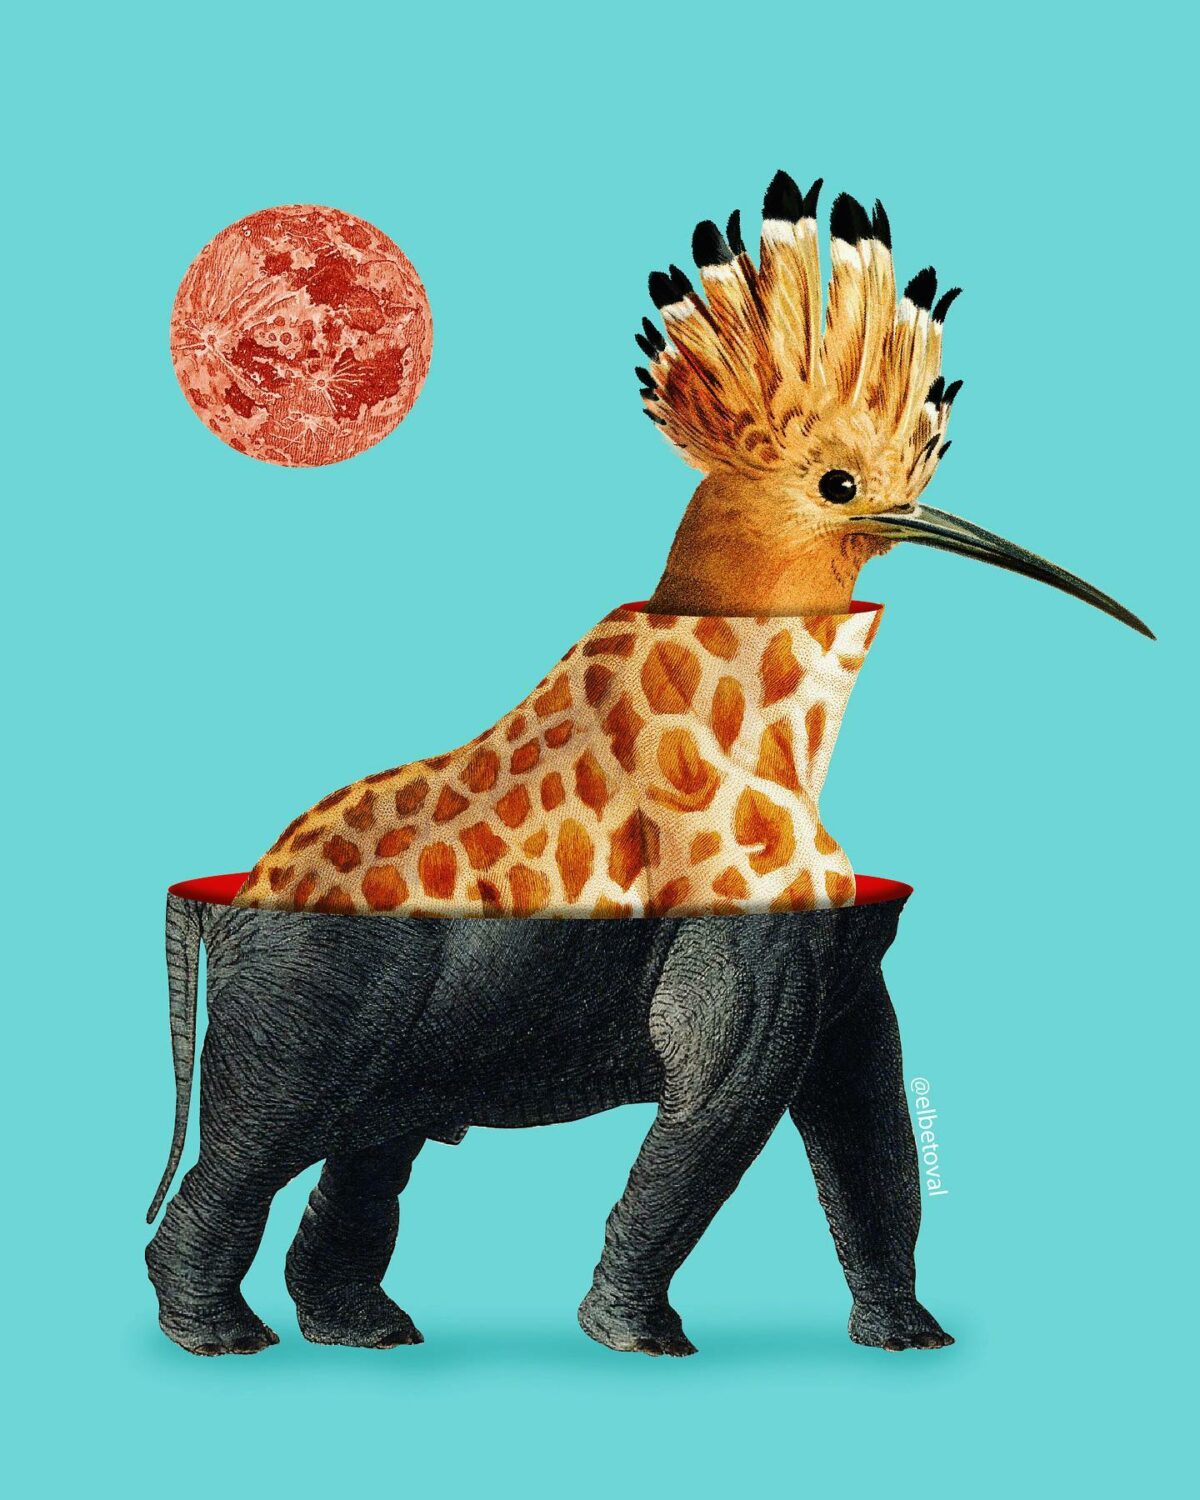 Surreal Digital Collages Of Hybrid Creatures By Beto Val (9)